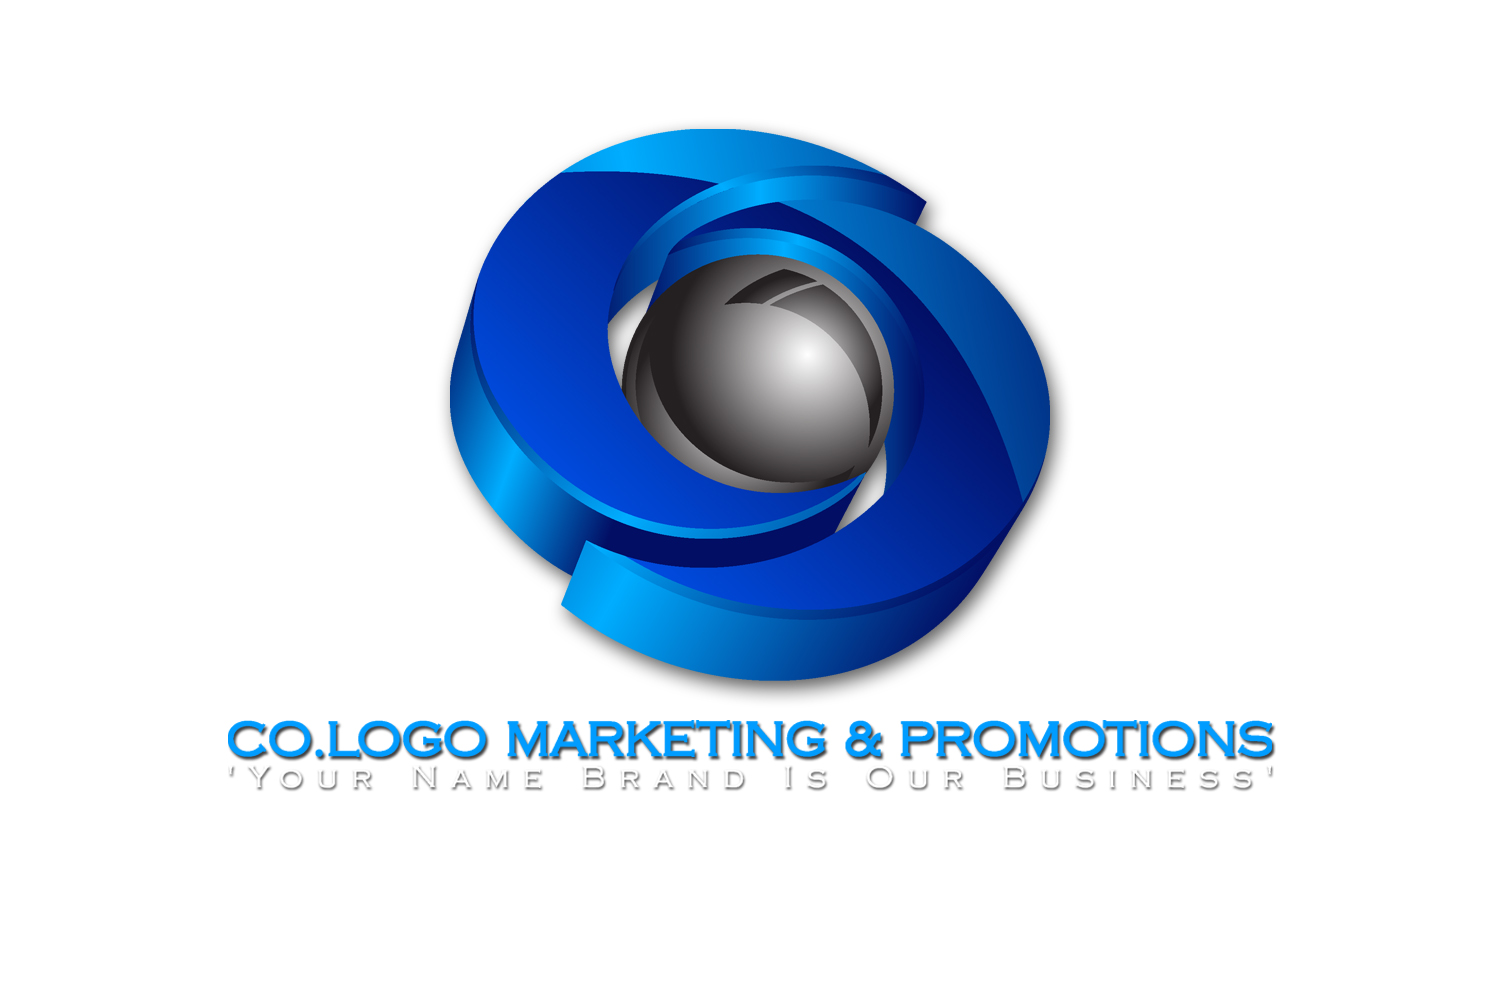 Co. Logo Marketing and Promotions's Logo